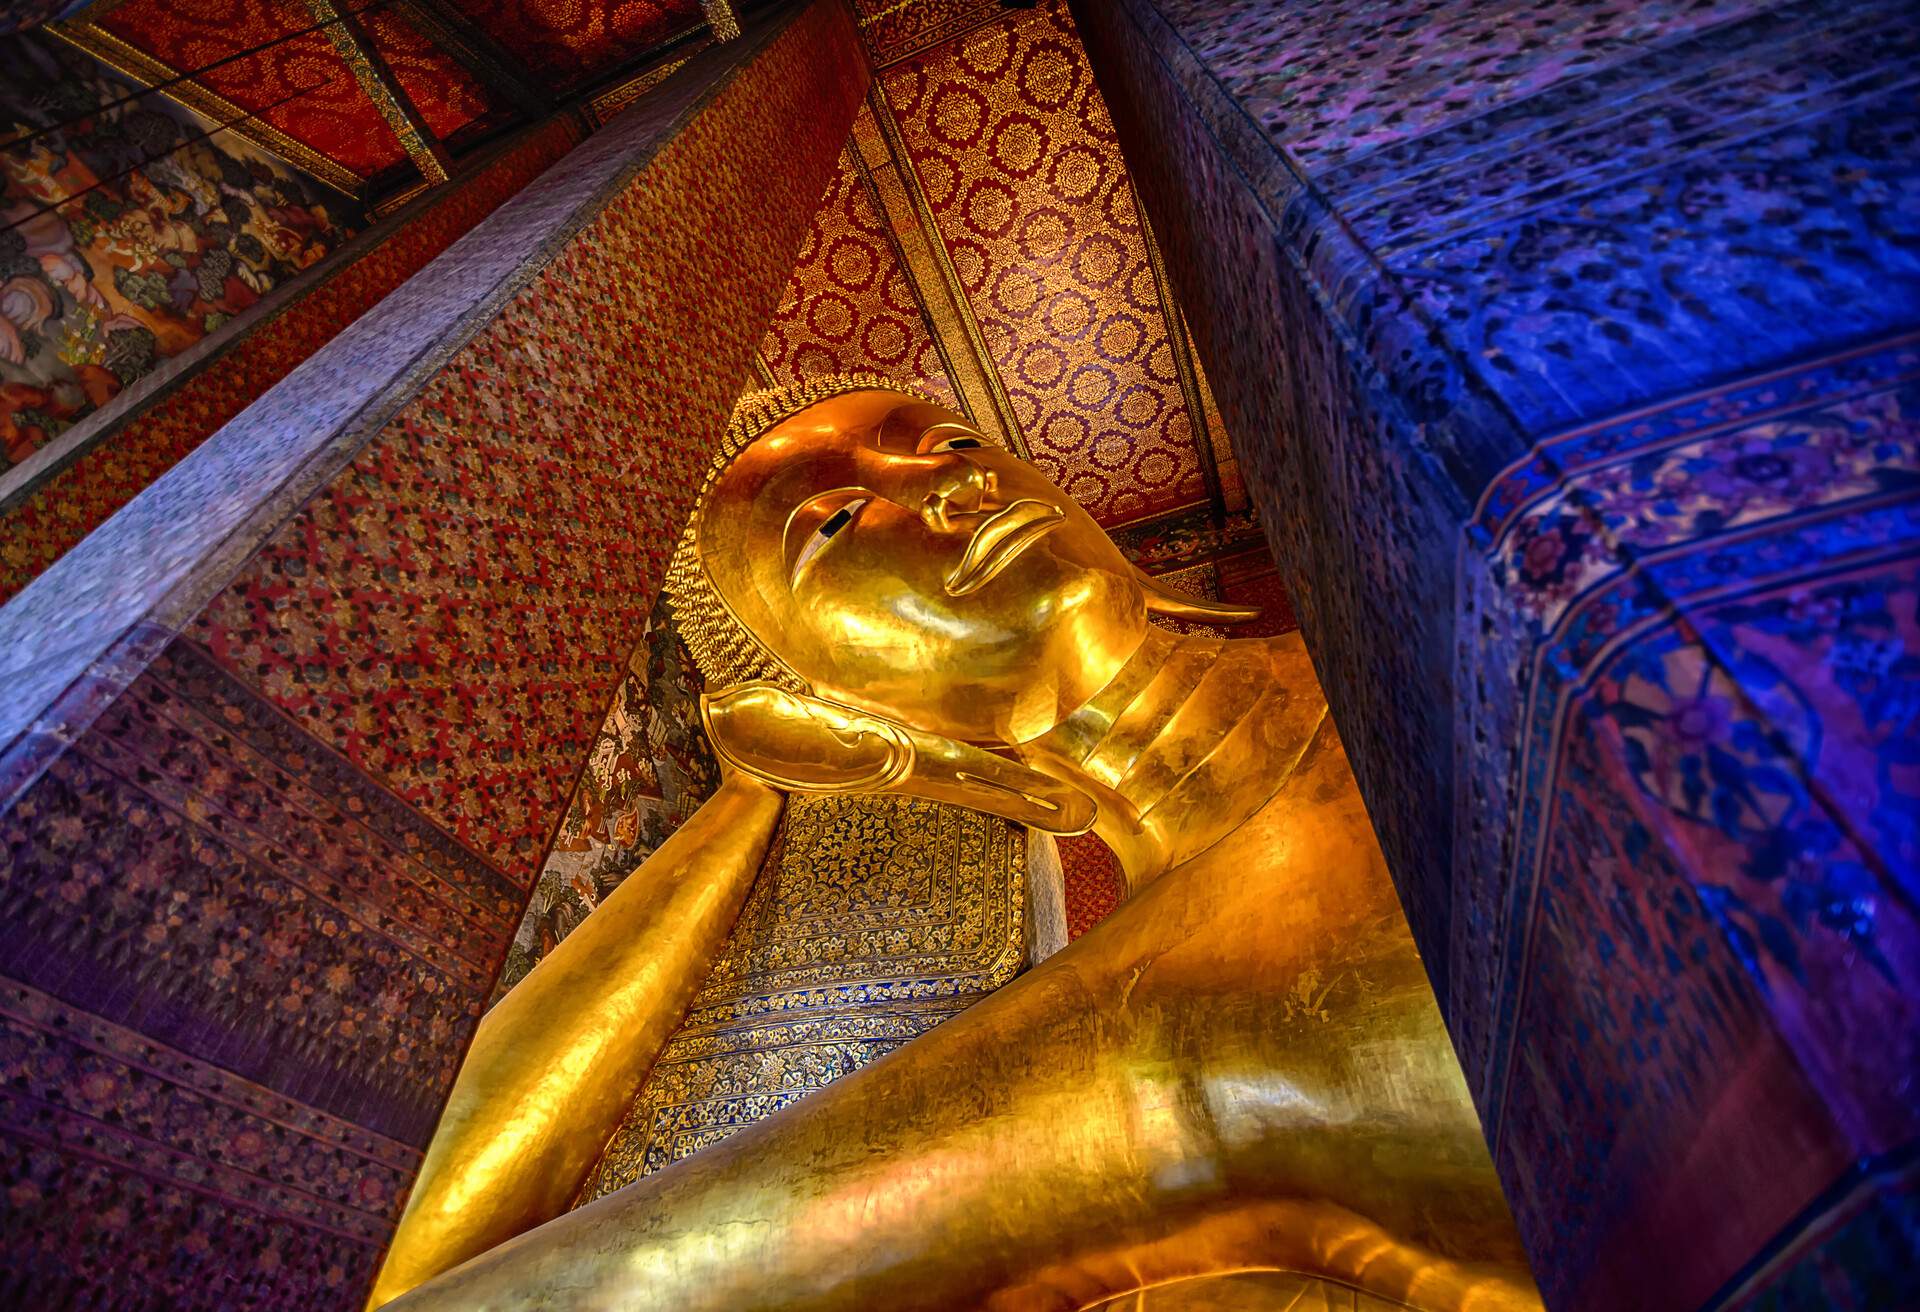 The Reclining Buddha inside the Wat Phra Chetuphon Vimolmangklararm Rajwaramahaviharn in a Buddhist temple complex of Wat Pho in the Phra Nakhon District, Bangkok, Thailand. Built by Rama III in 1832 which represents the entry of Buddha into Nirvana and the end of all reincarnations.The image is 15 meters high and 46 meters long and one of the largest Buddha statue in Thailand.